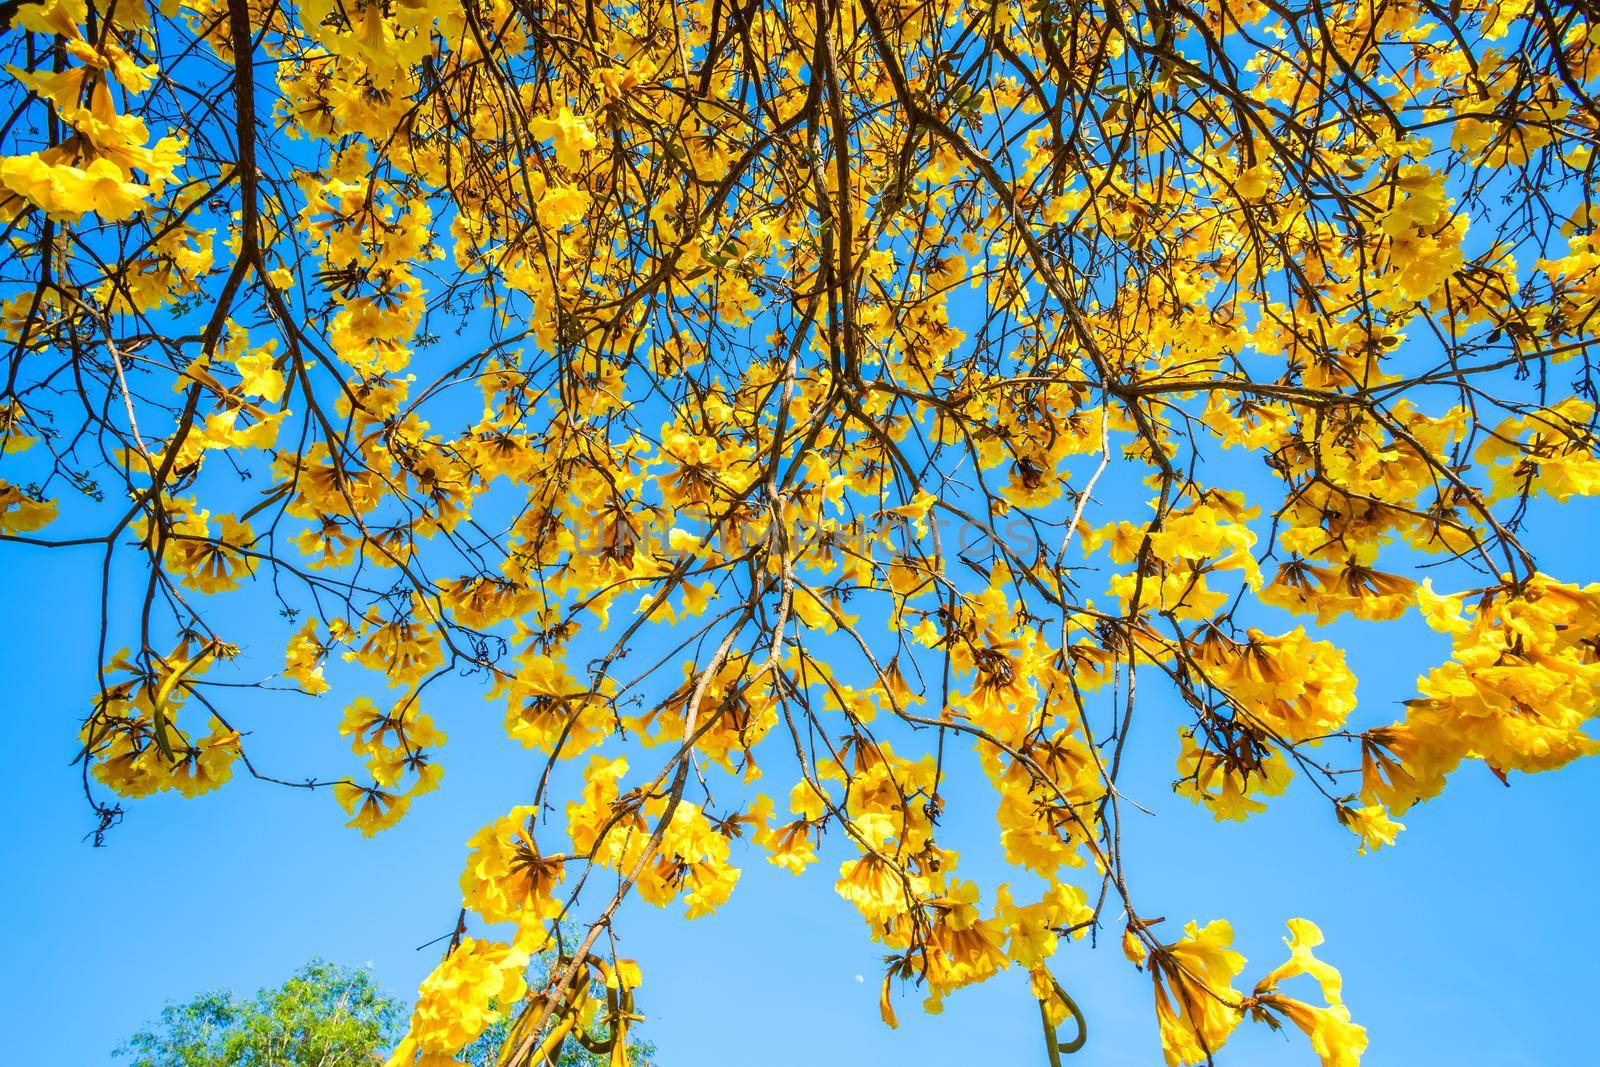 Golden trumpet tree at Park in on blue sky background.